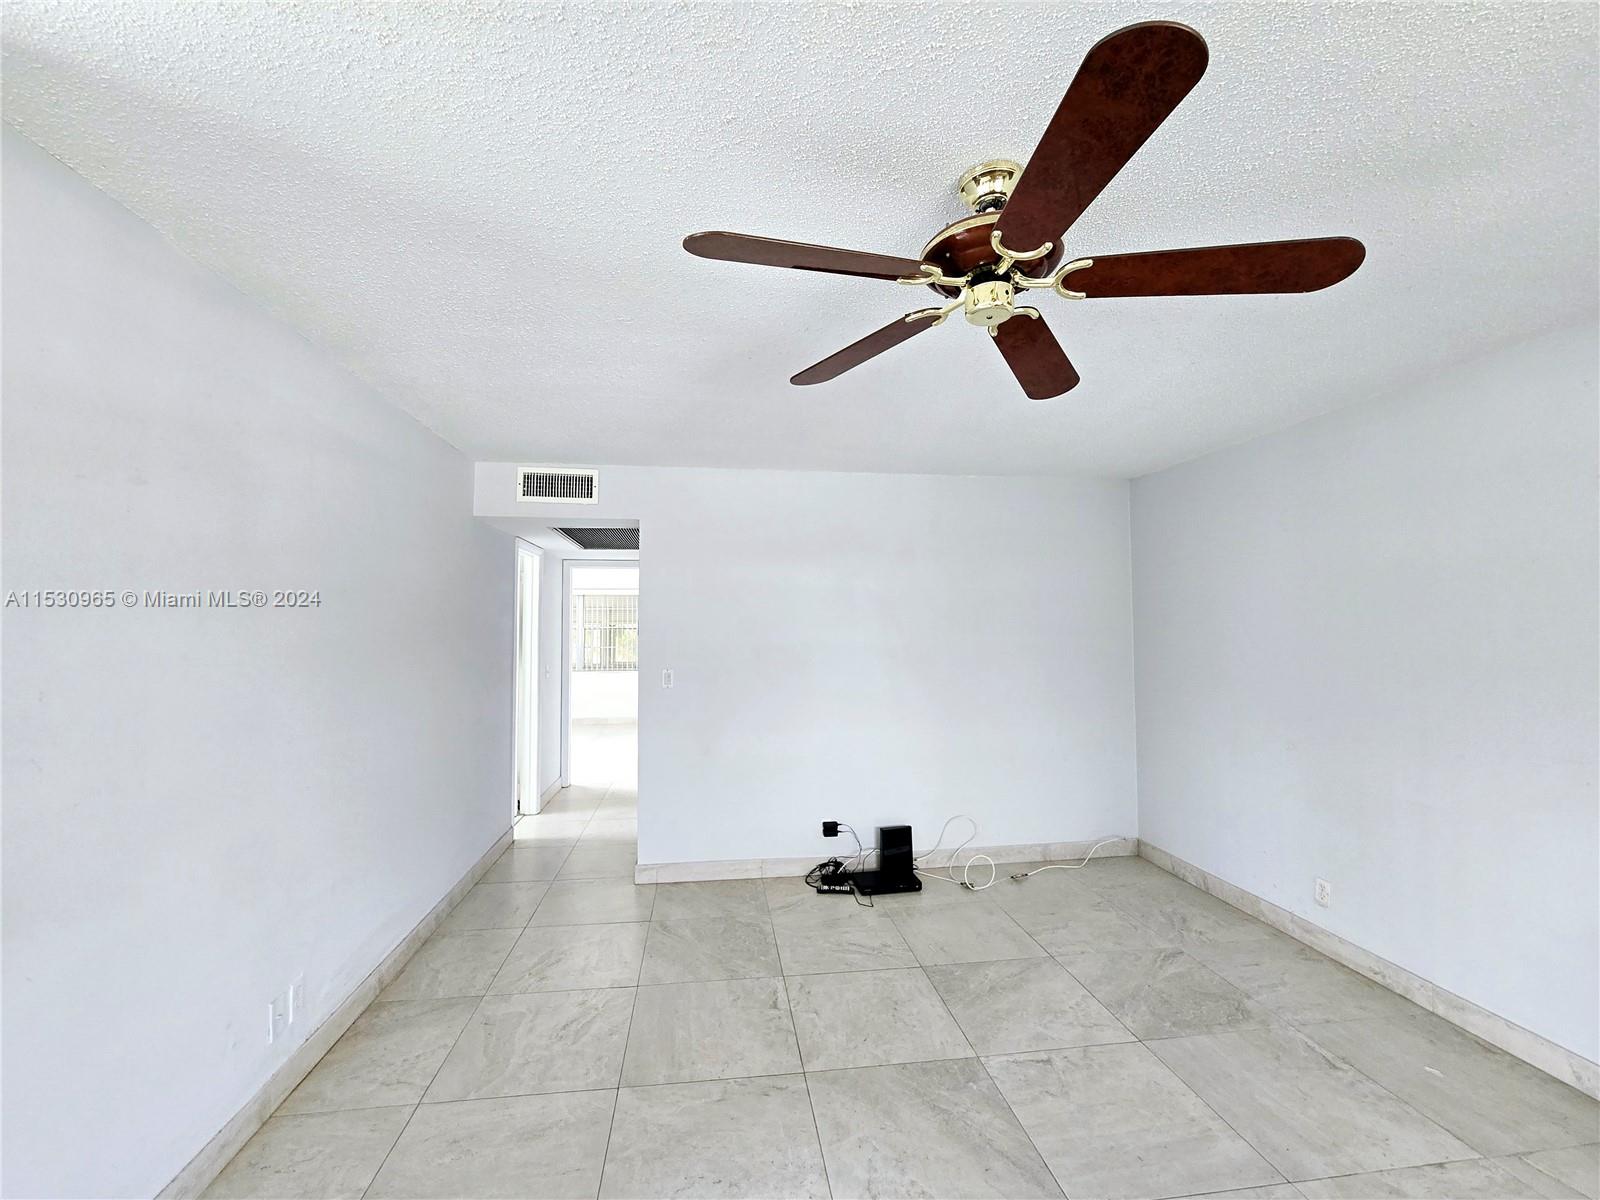 an empty room with windows and ceiling fan